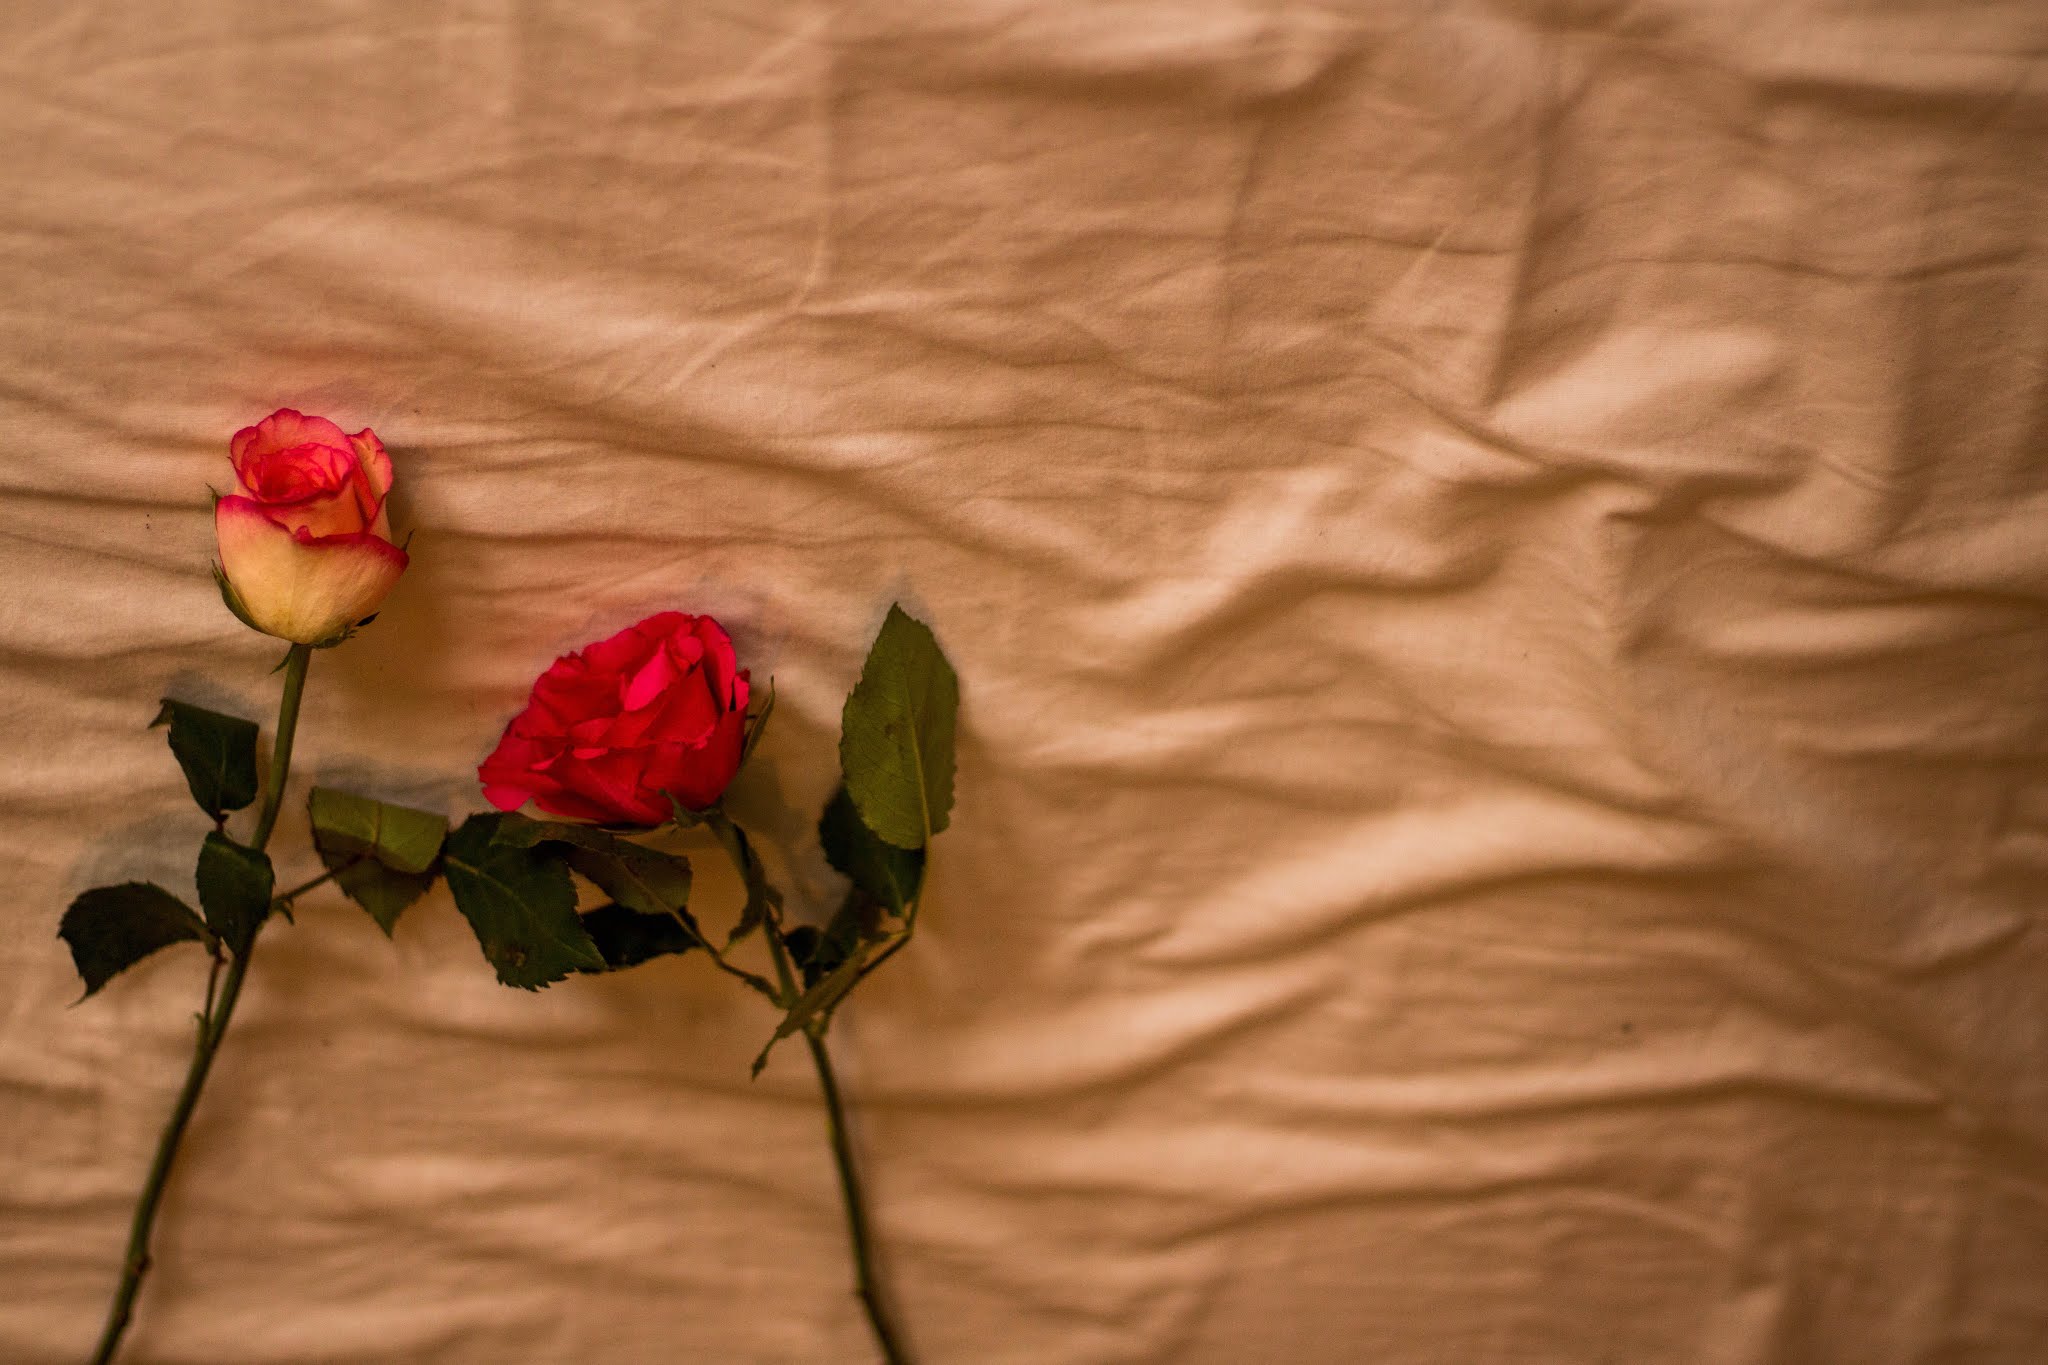 Roses on bedsheets - an outlook on love, valentines day blog post